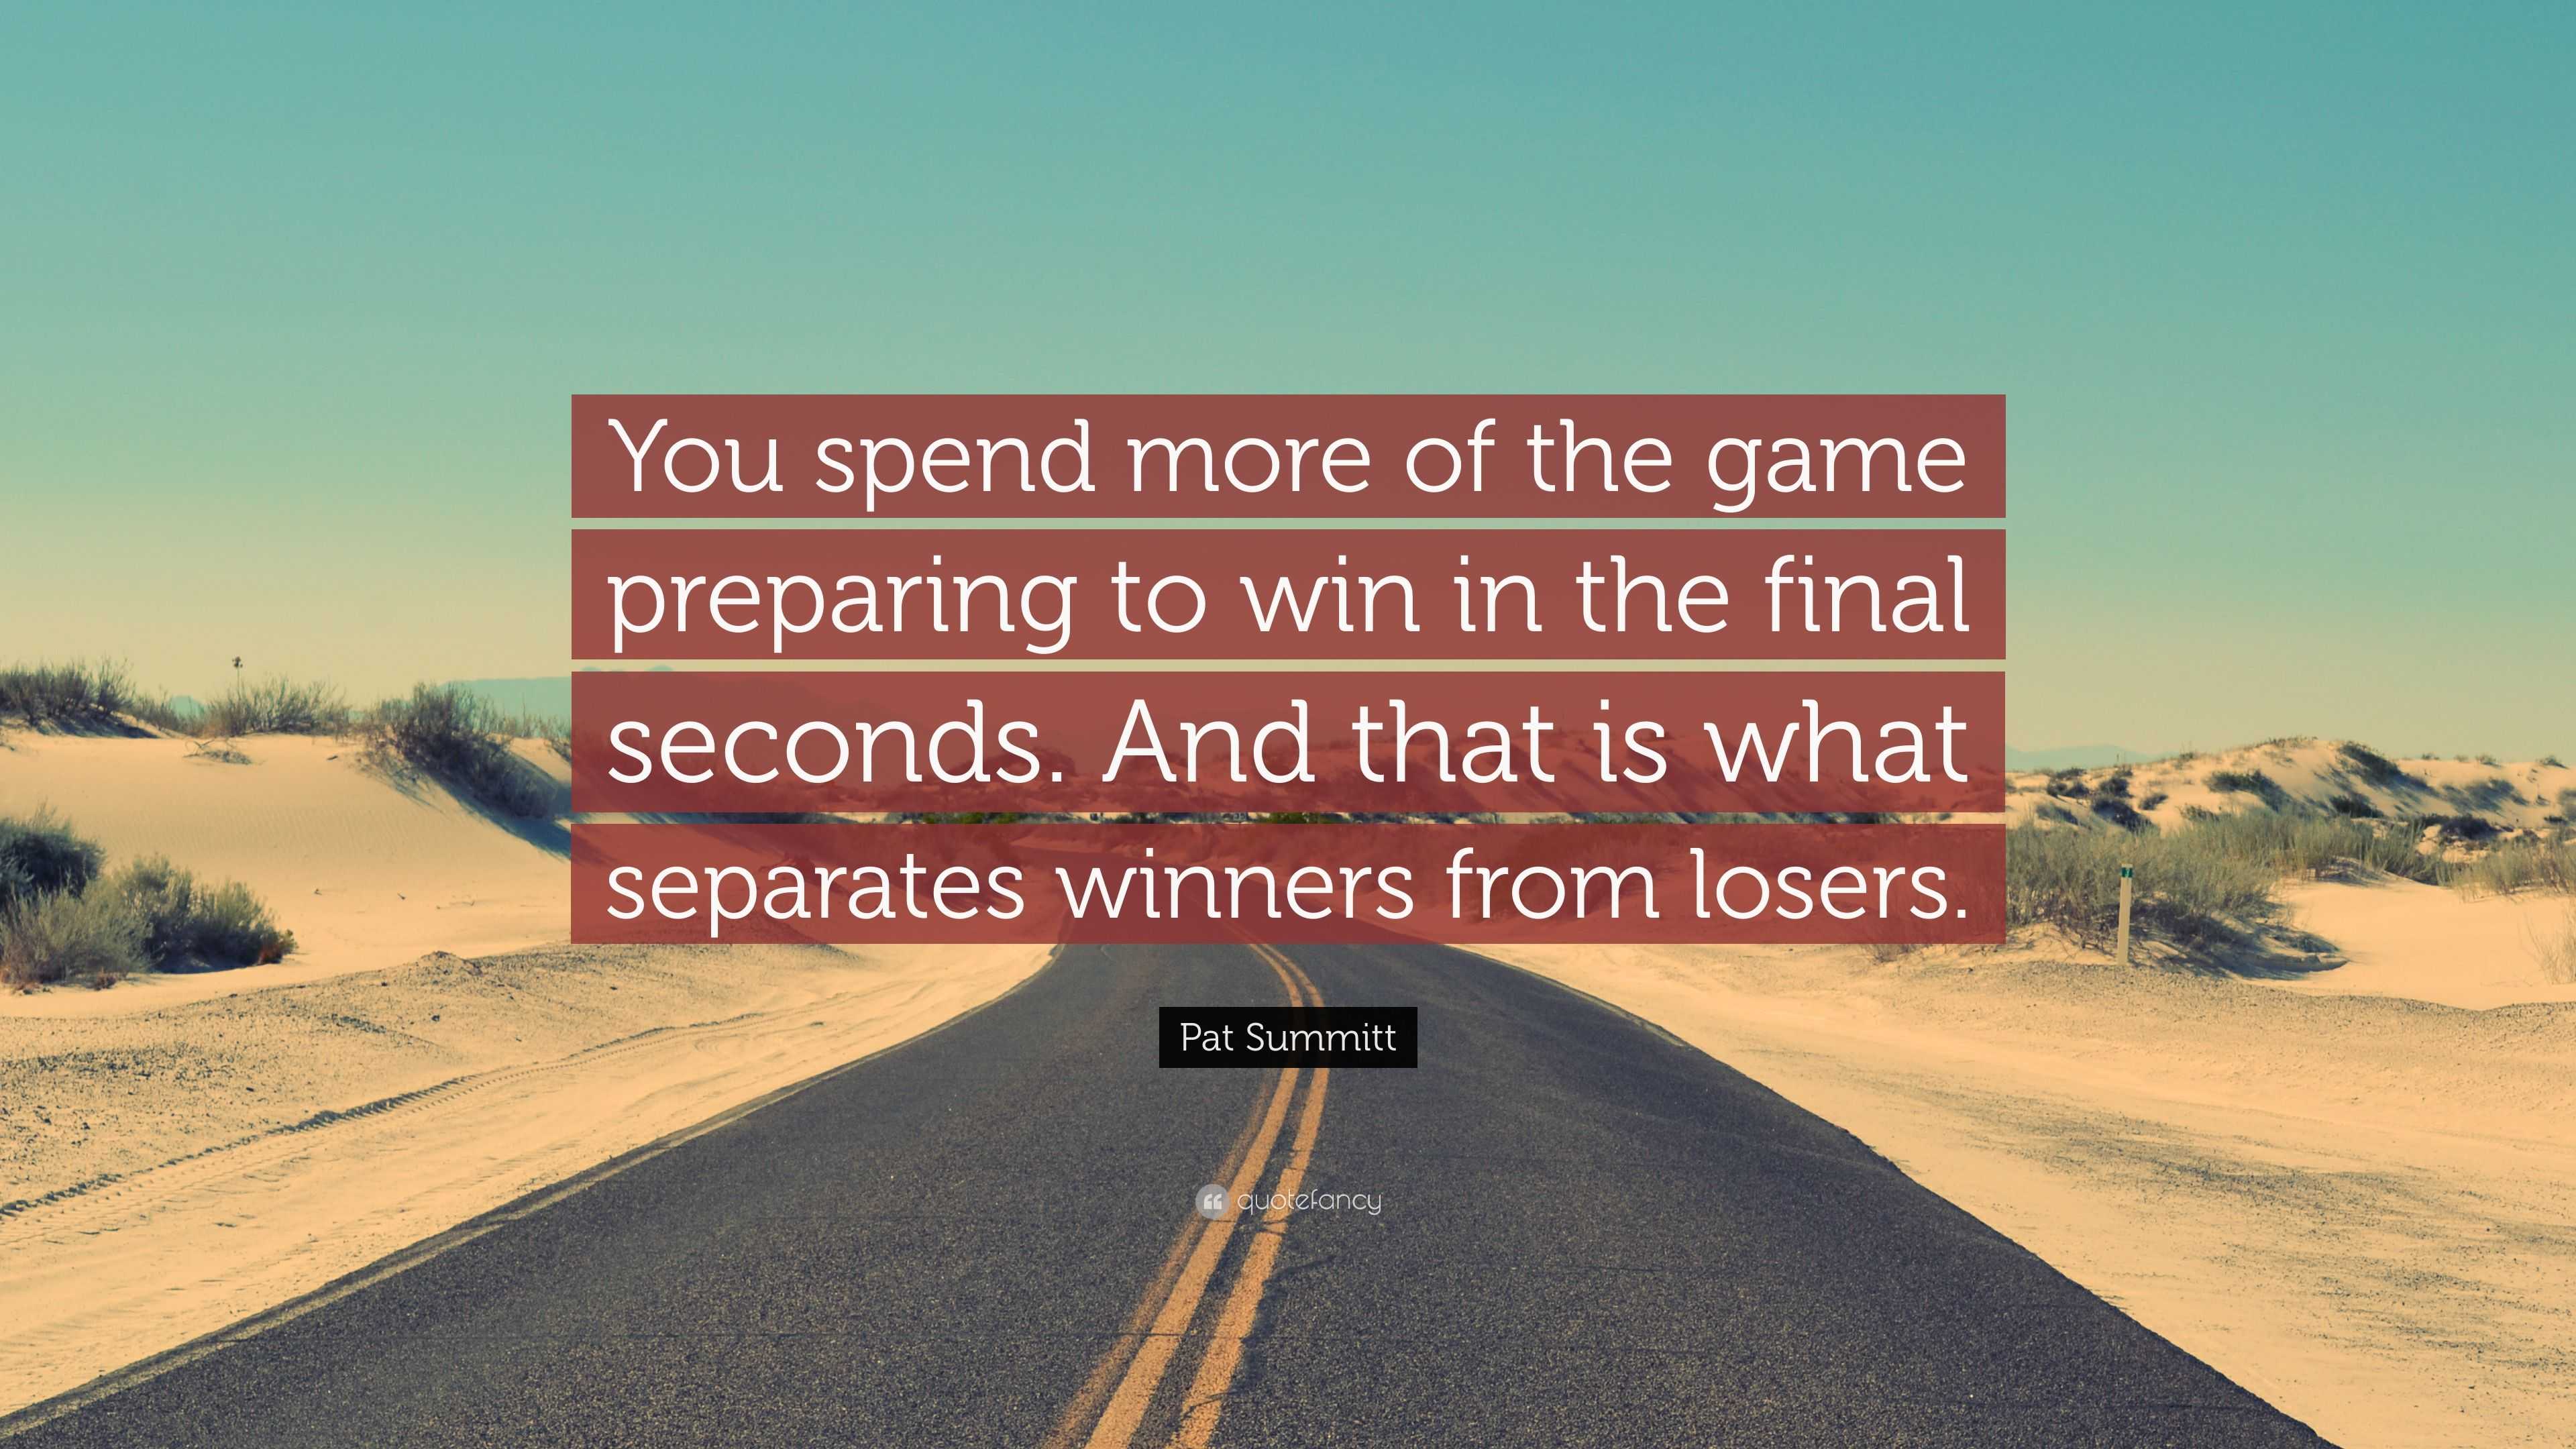 Pat Summitt Quote: “You spend more of the game preparing to win in the